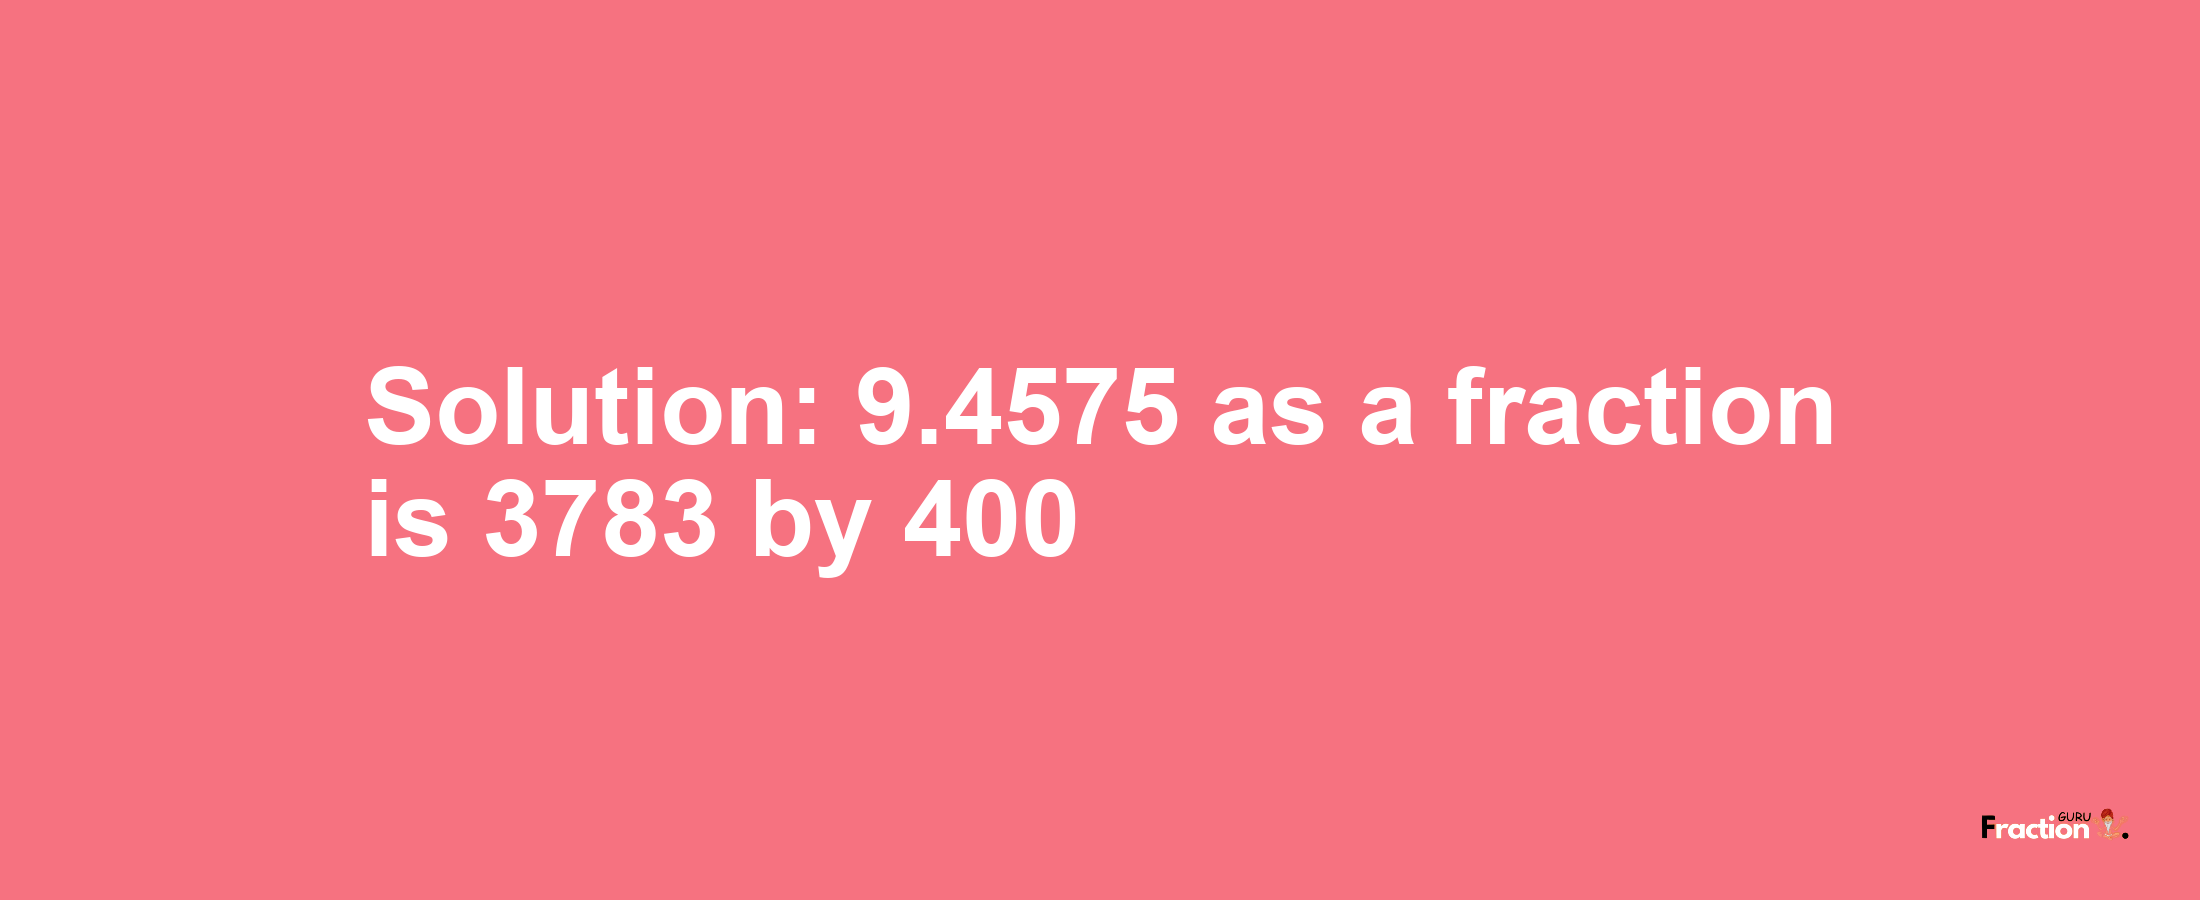 Solution:9.4575 as a fraction is 3783/400